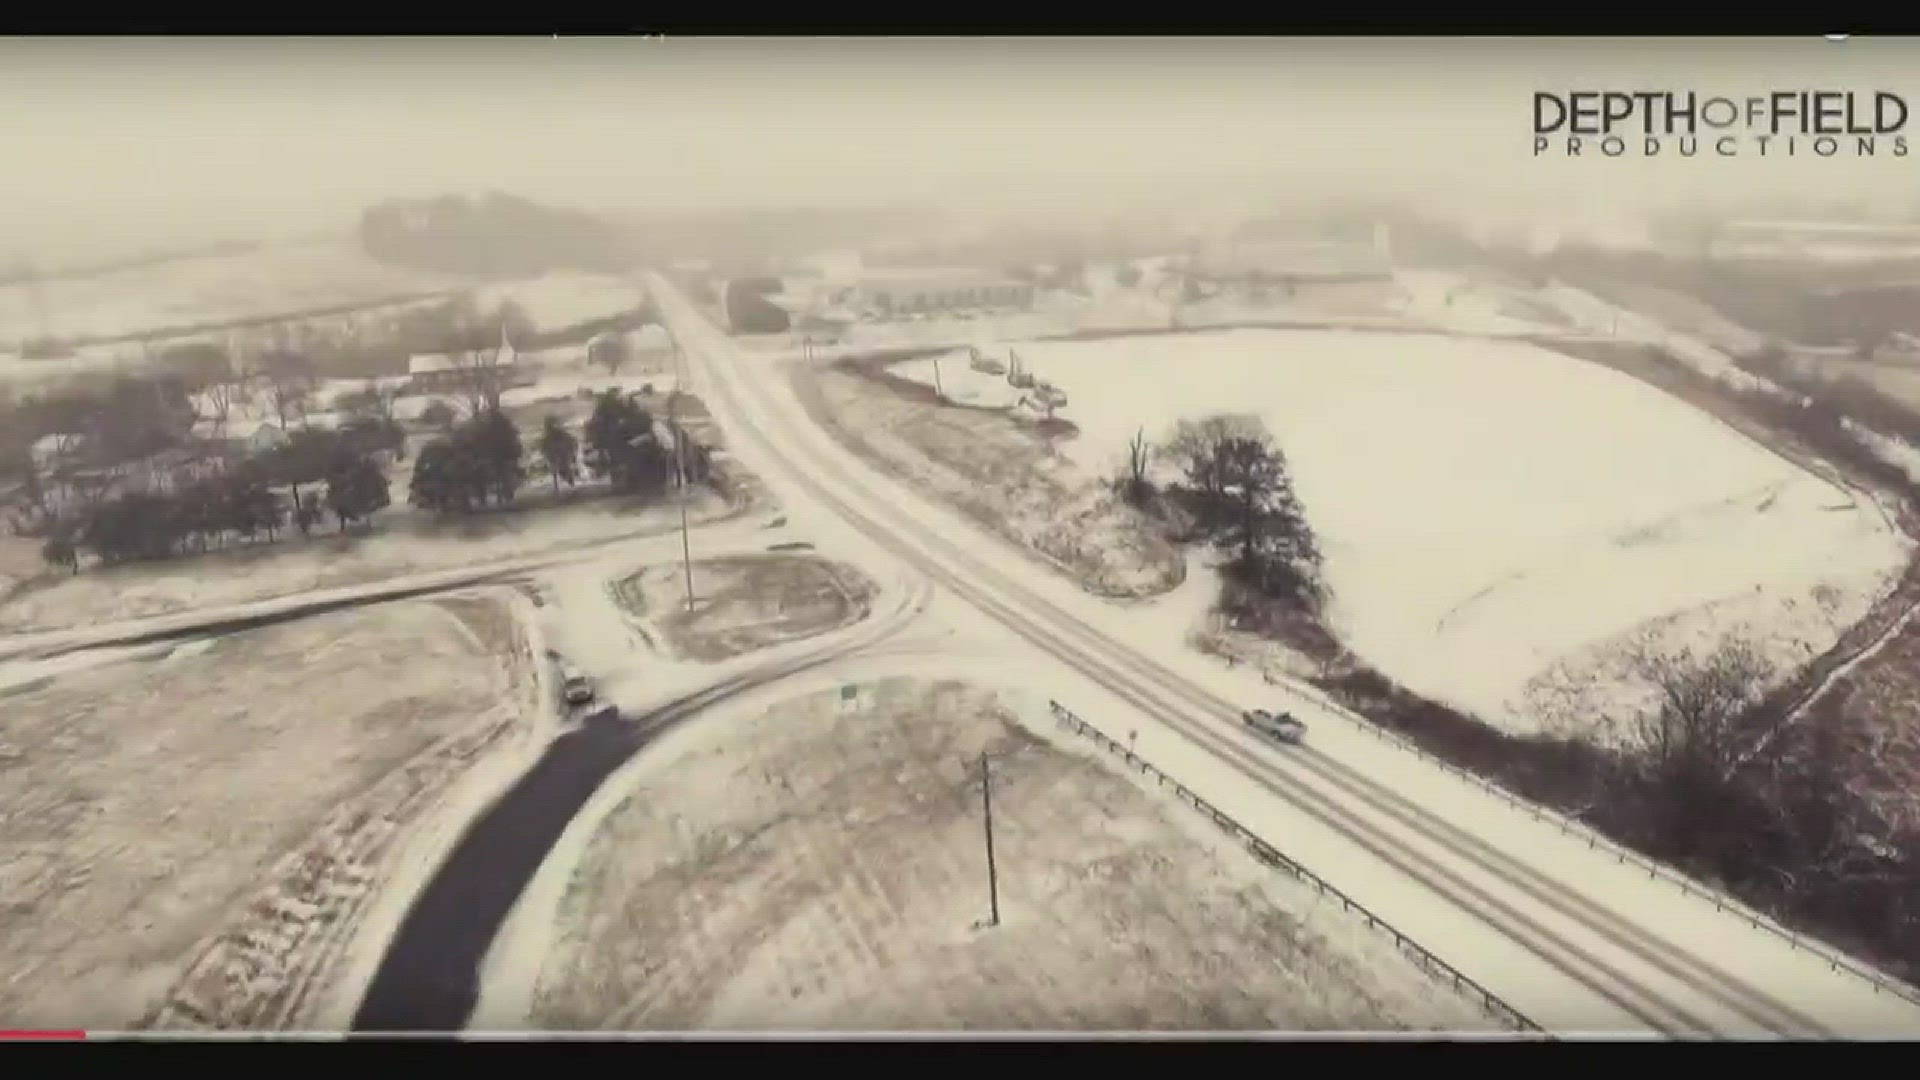 Jonathan Halley's drone captured images of Knoxville during Wednesday's snow storm.